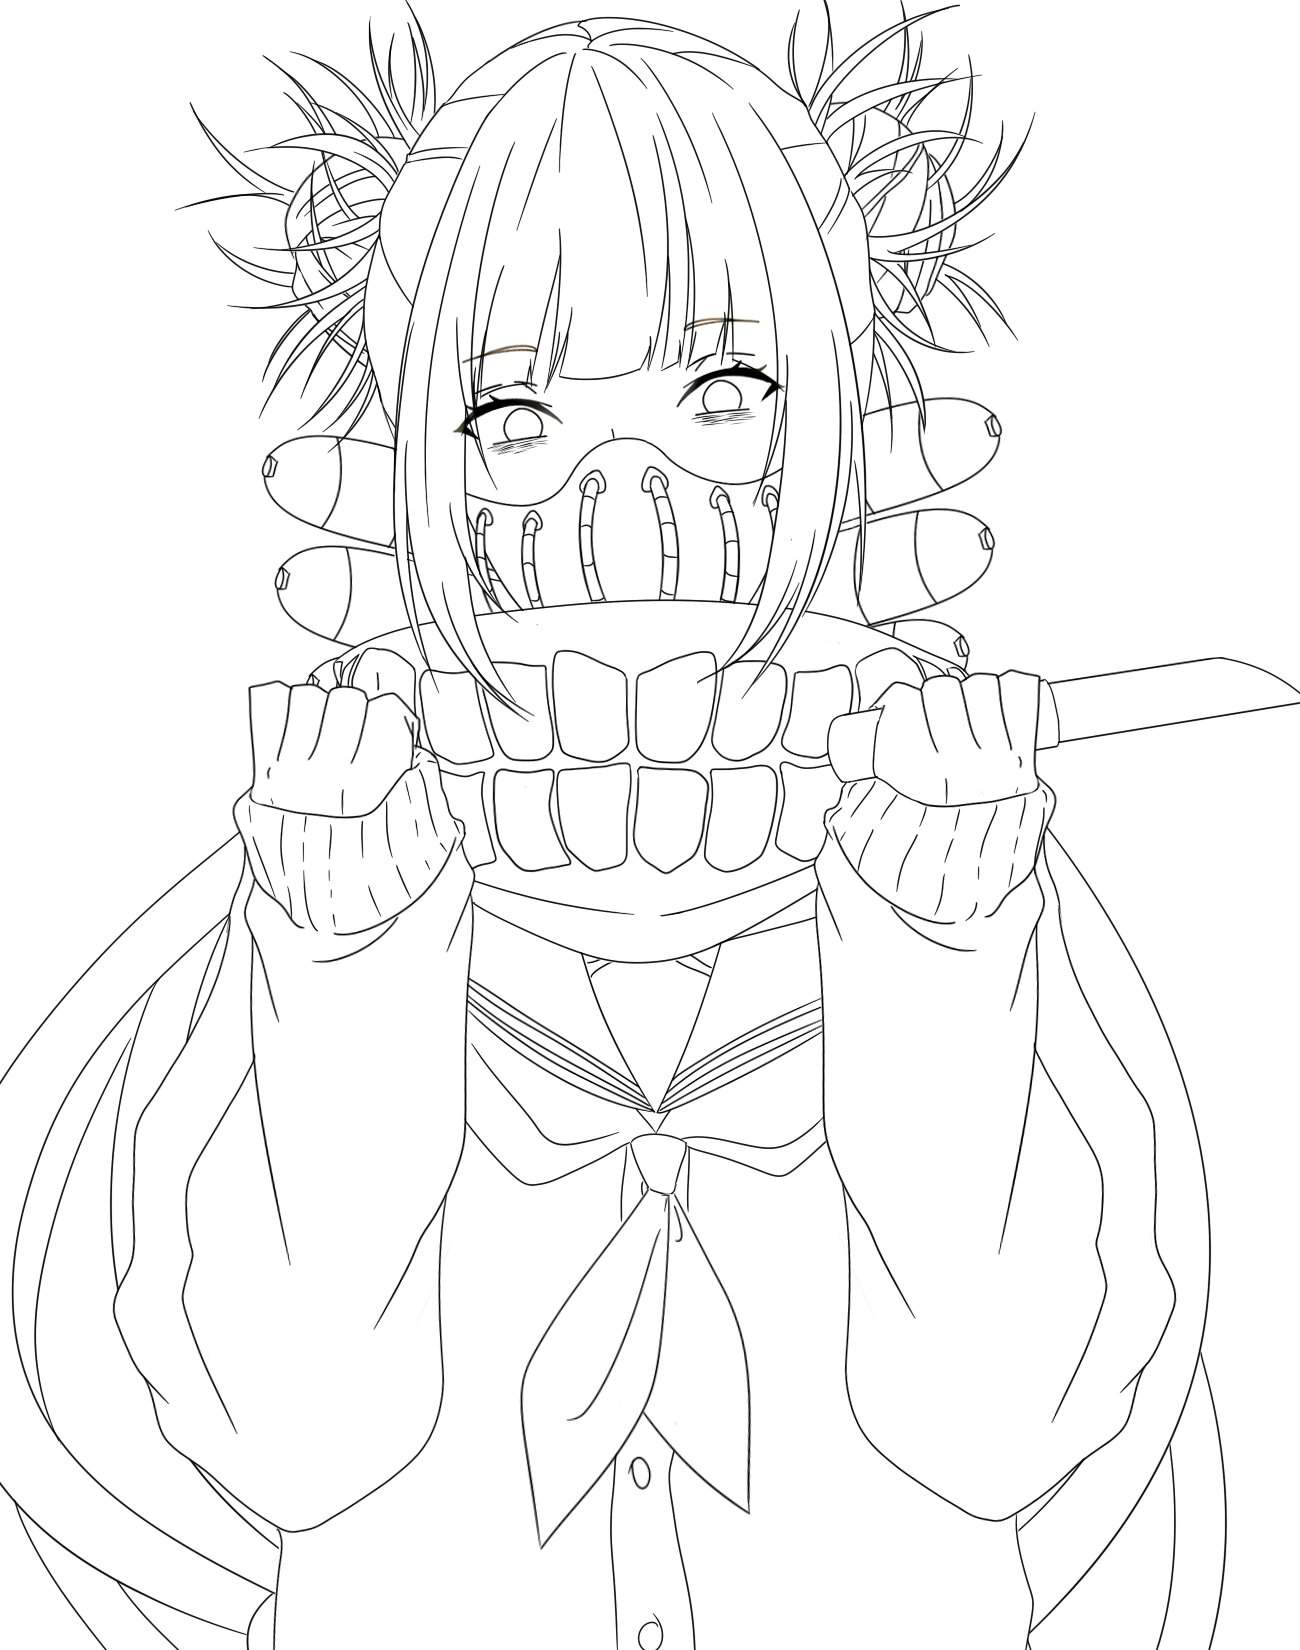 Anime Coloring Pages Toga - Coloring and Drawing